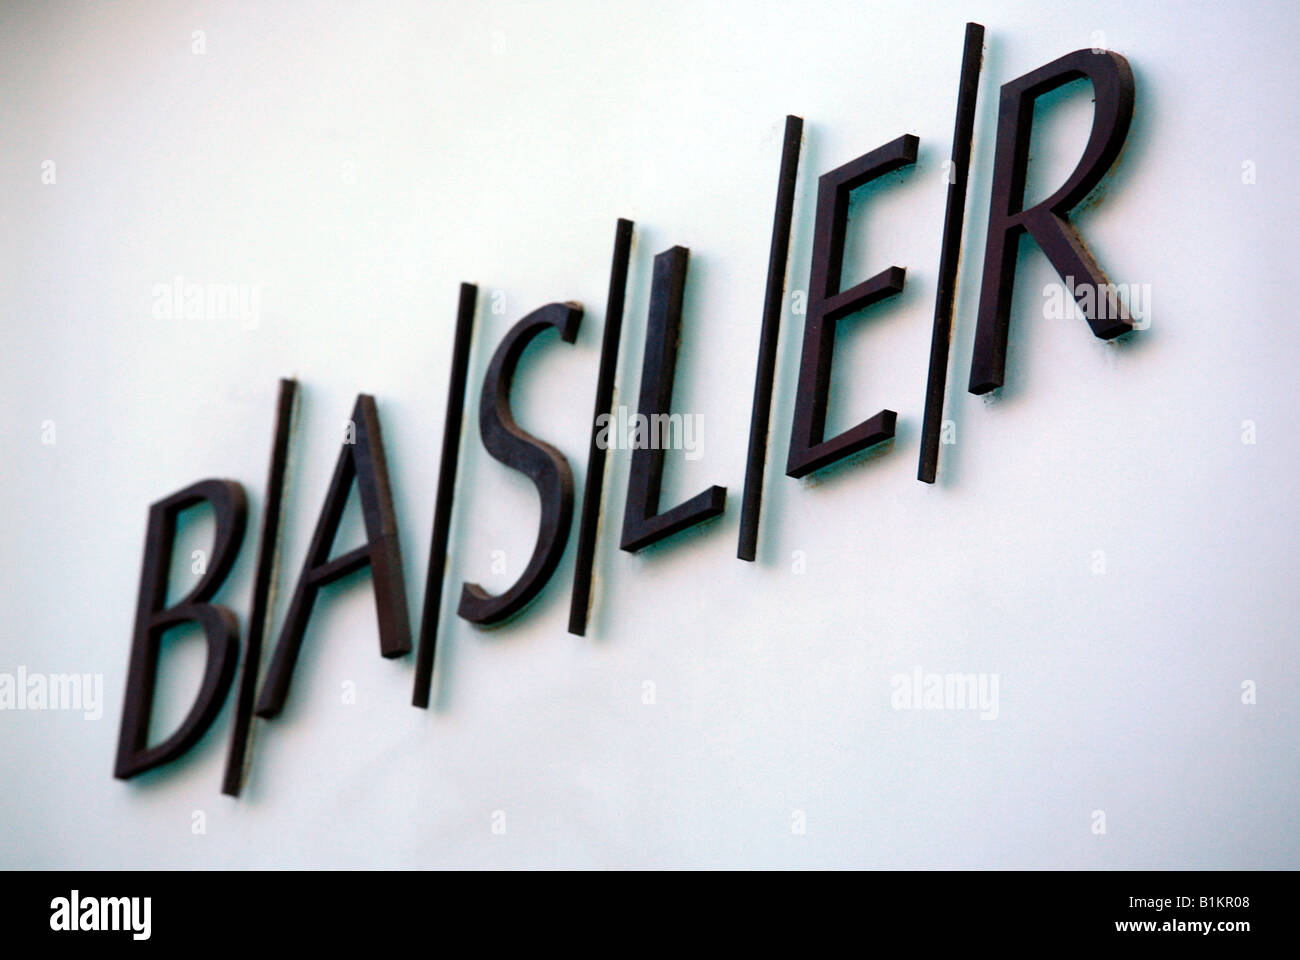 Basler store front, London Stock Photo